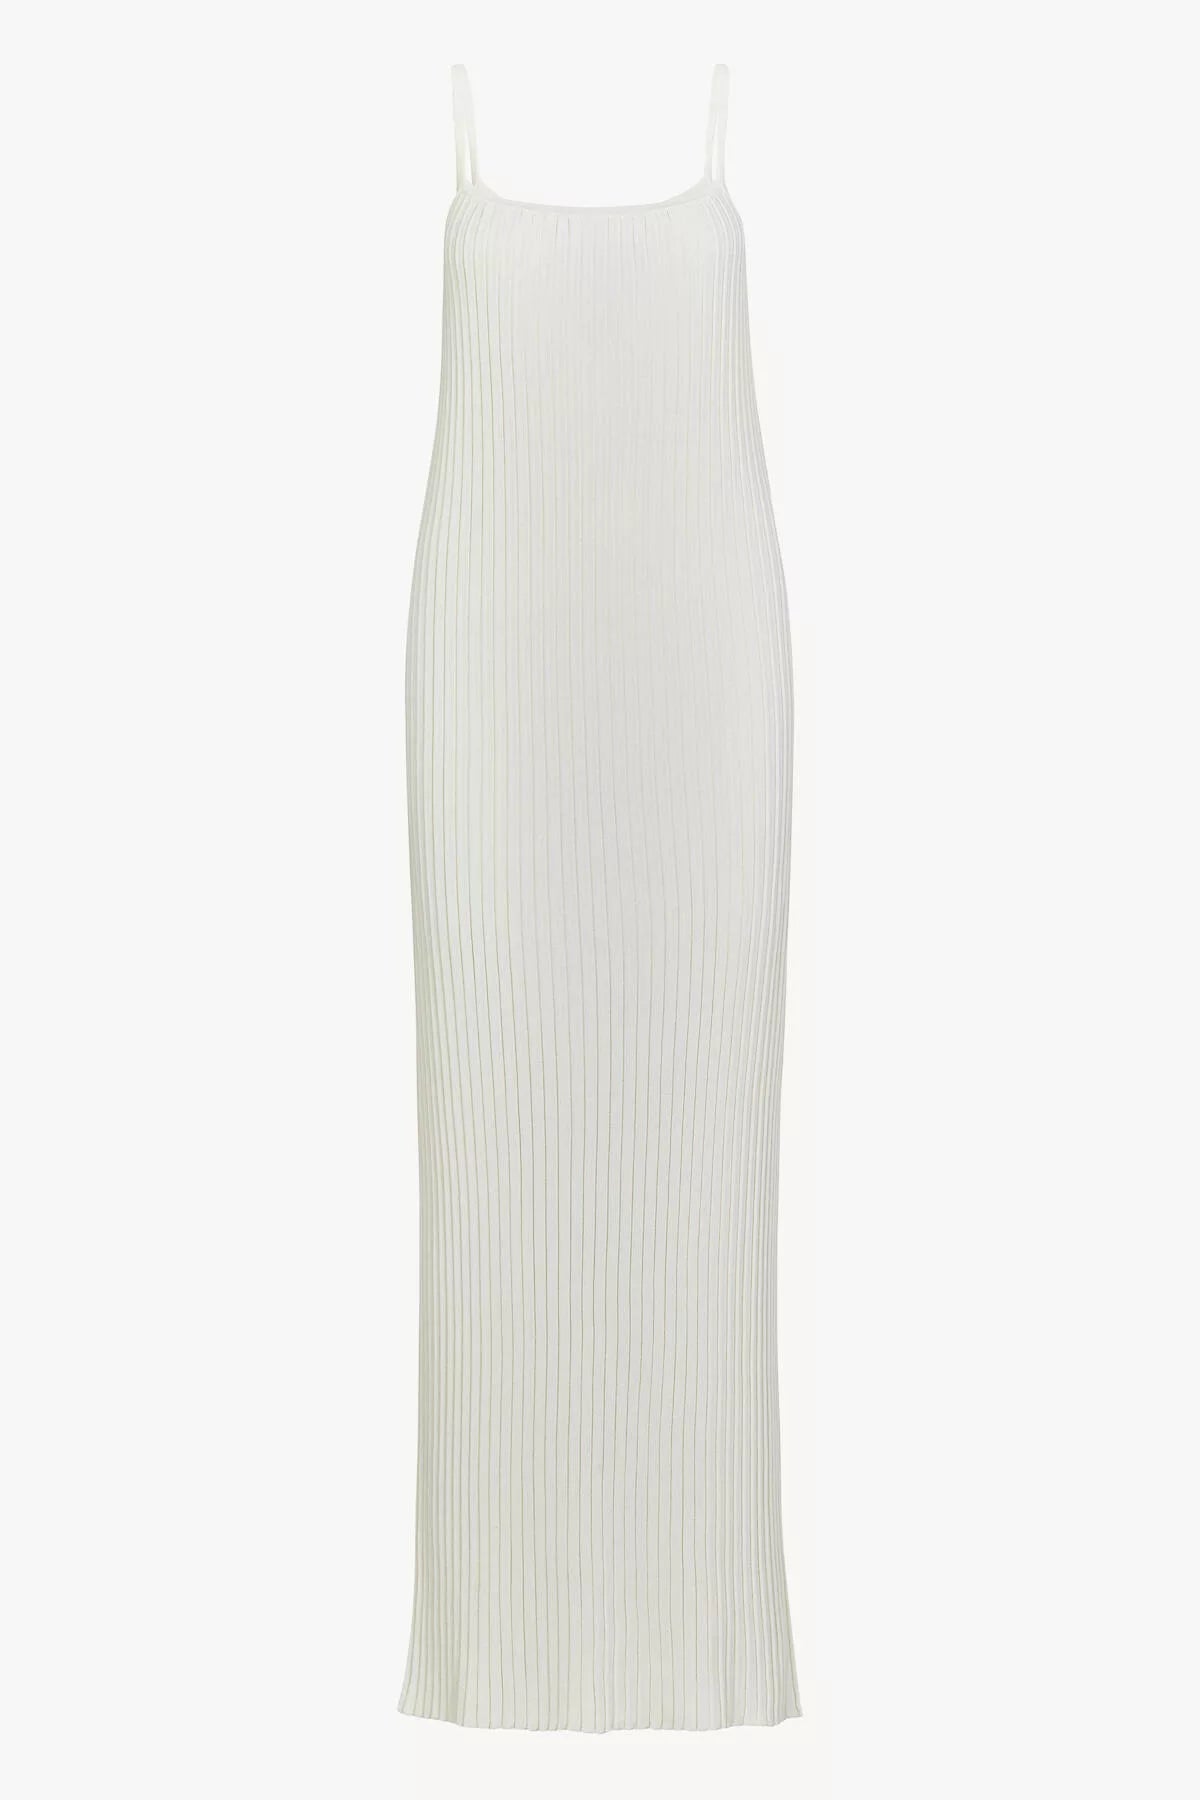 Giuliva-Heritage-The-Lizzie-Dress-Ribbed-Knit_Ivory-Amarees